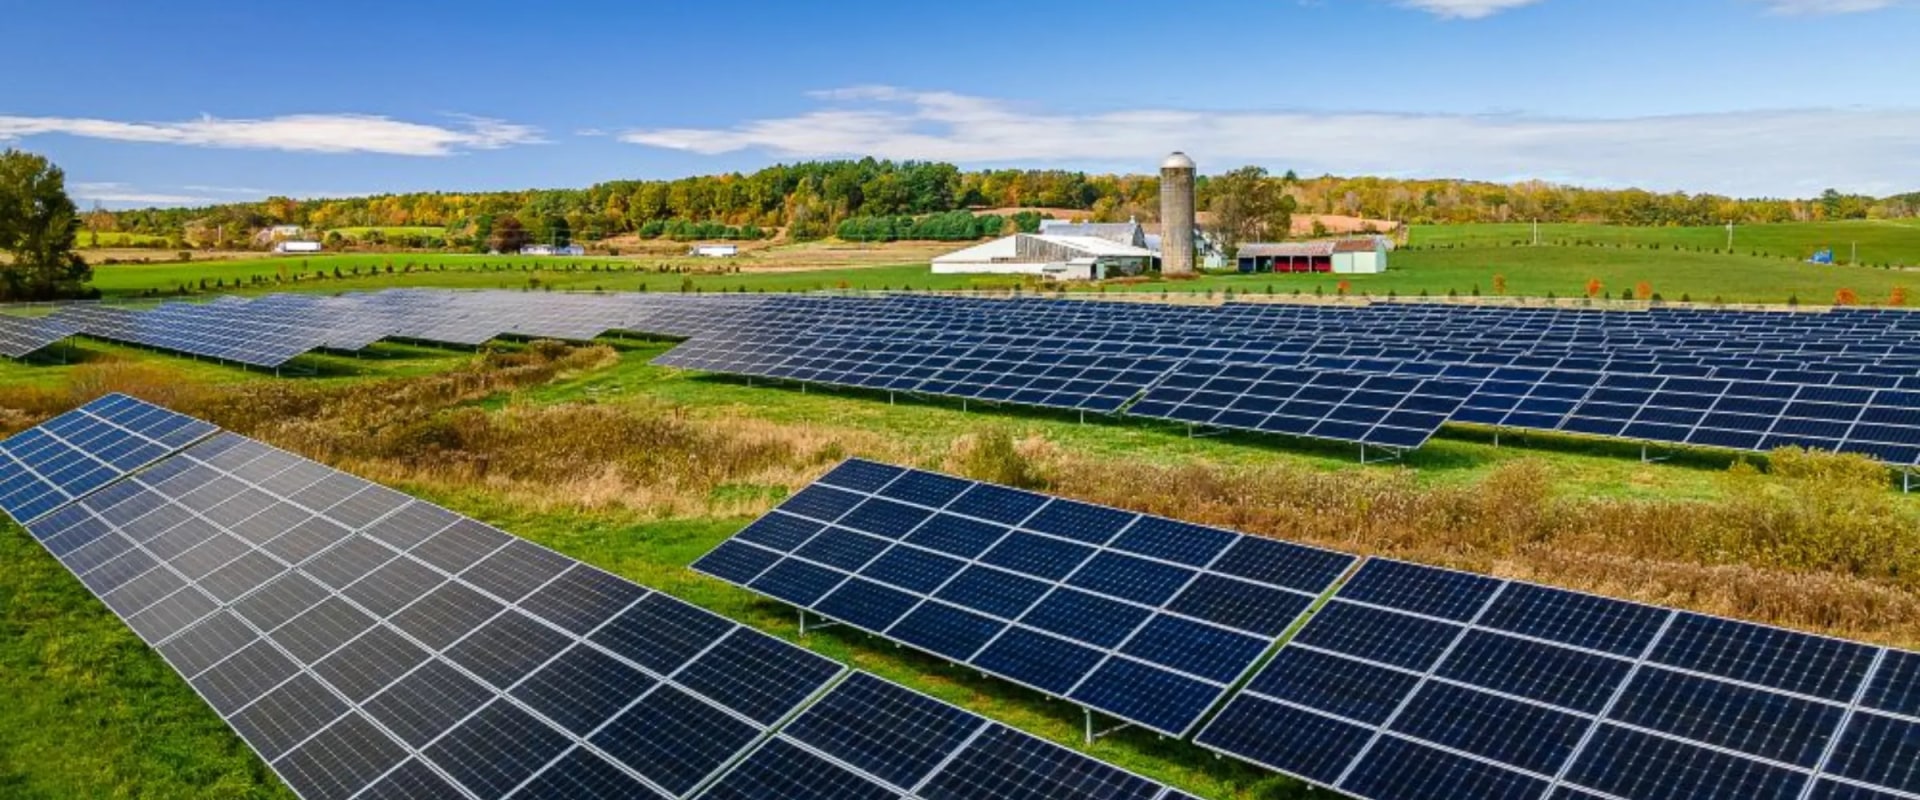 Community Solar Projects: Bringing Renewable Energy to Neighborhoods and Beyond